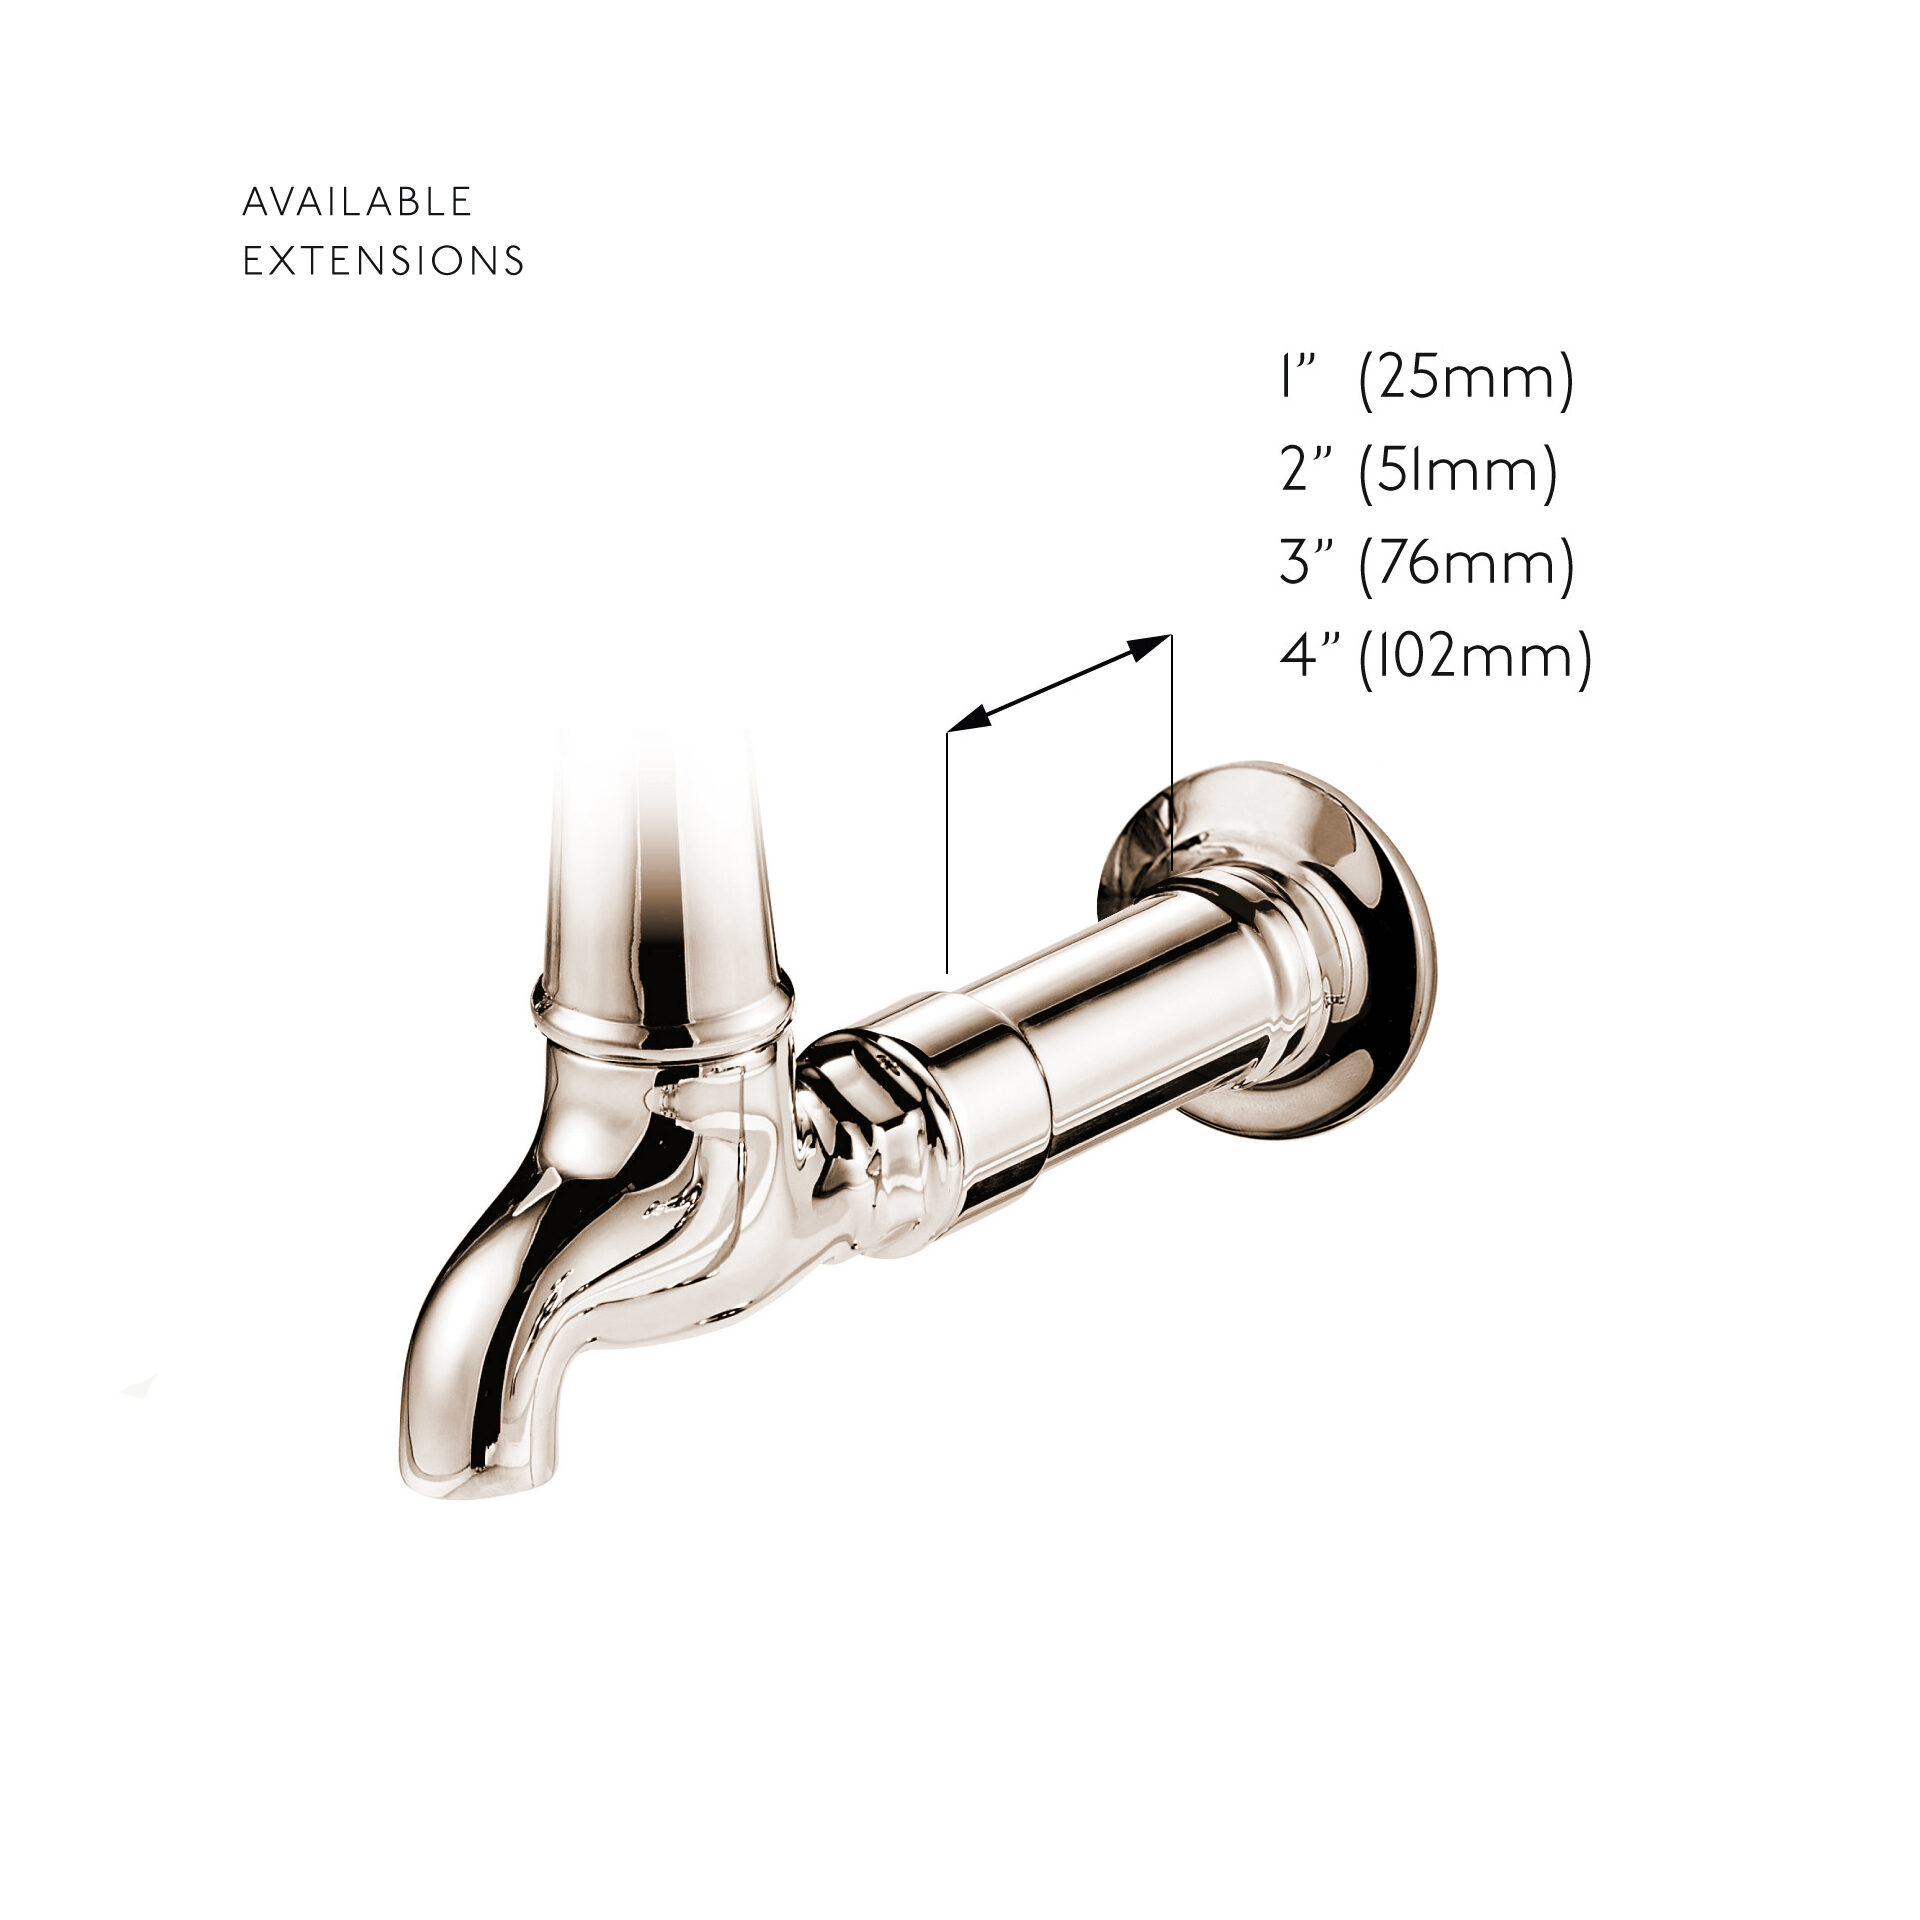 available extensions measurements for bespoke British taps